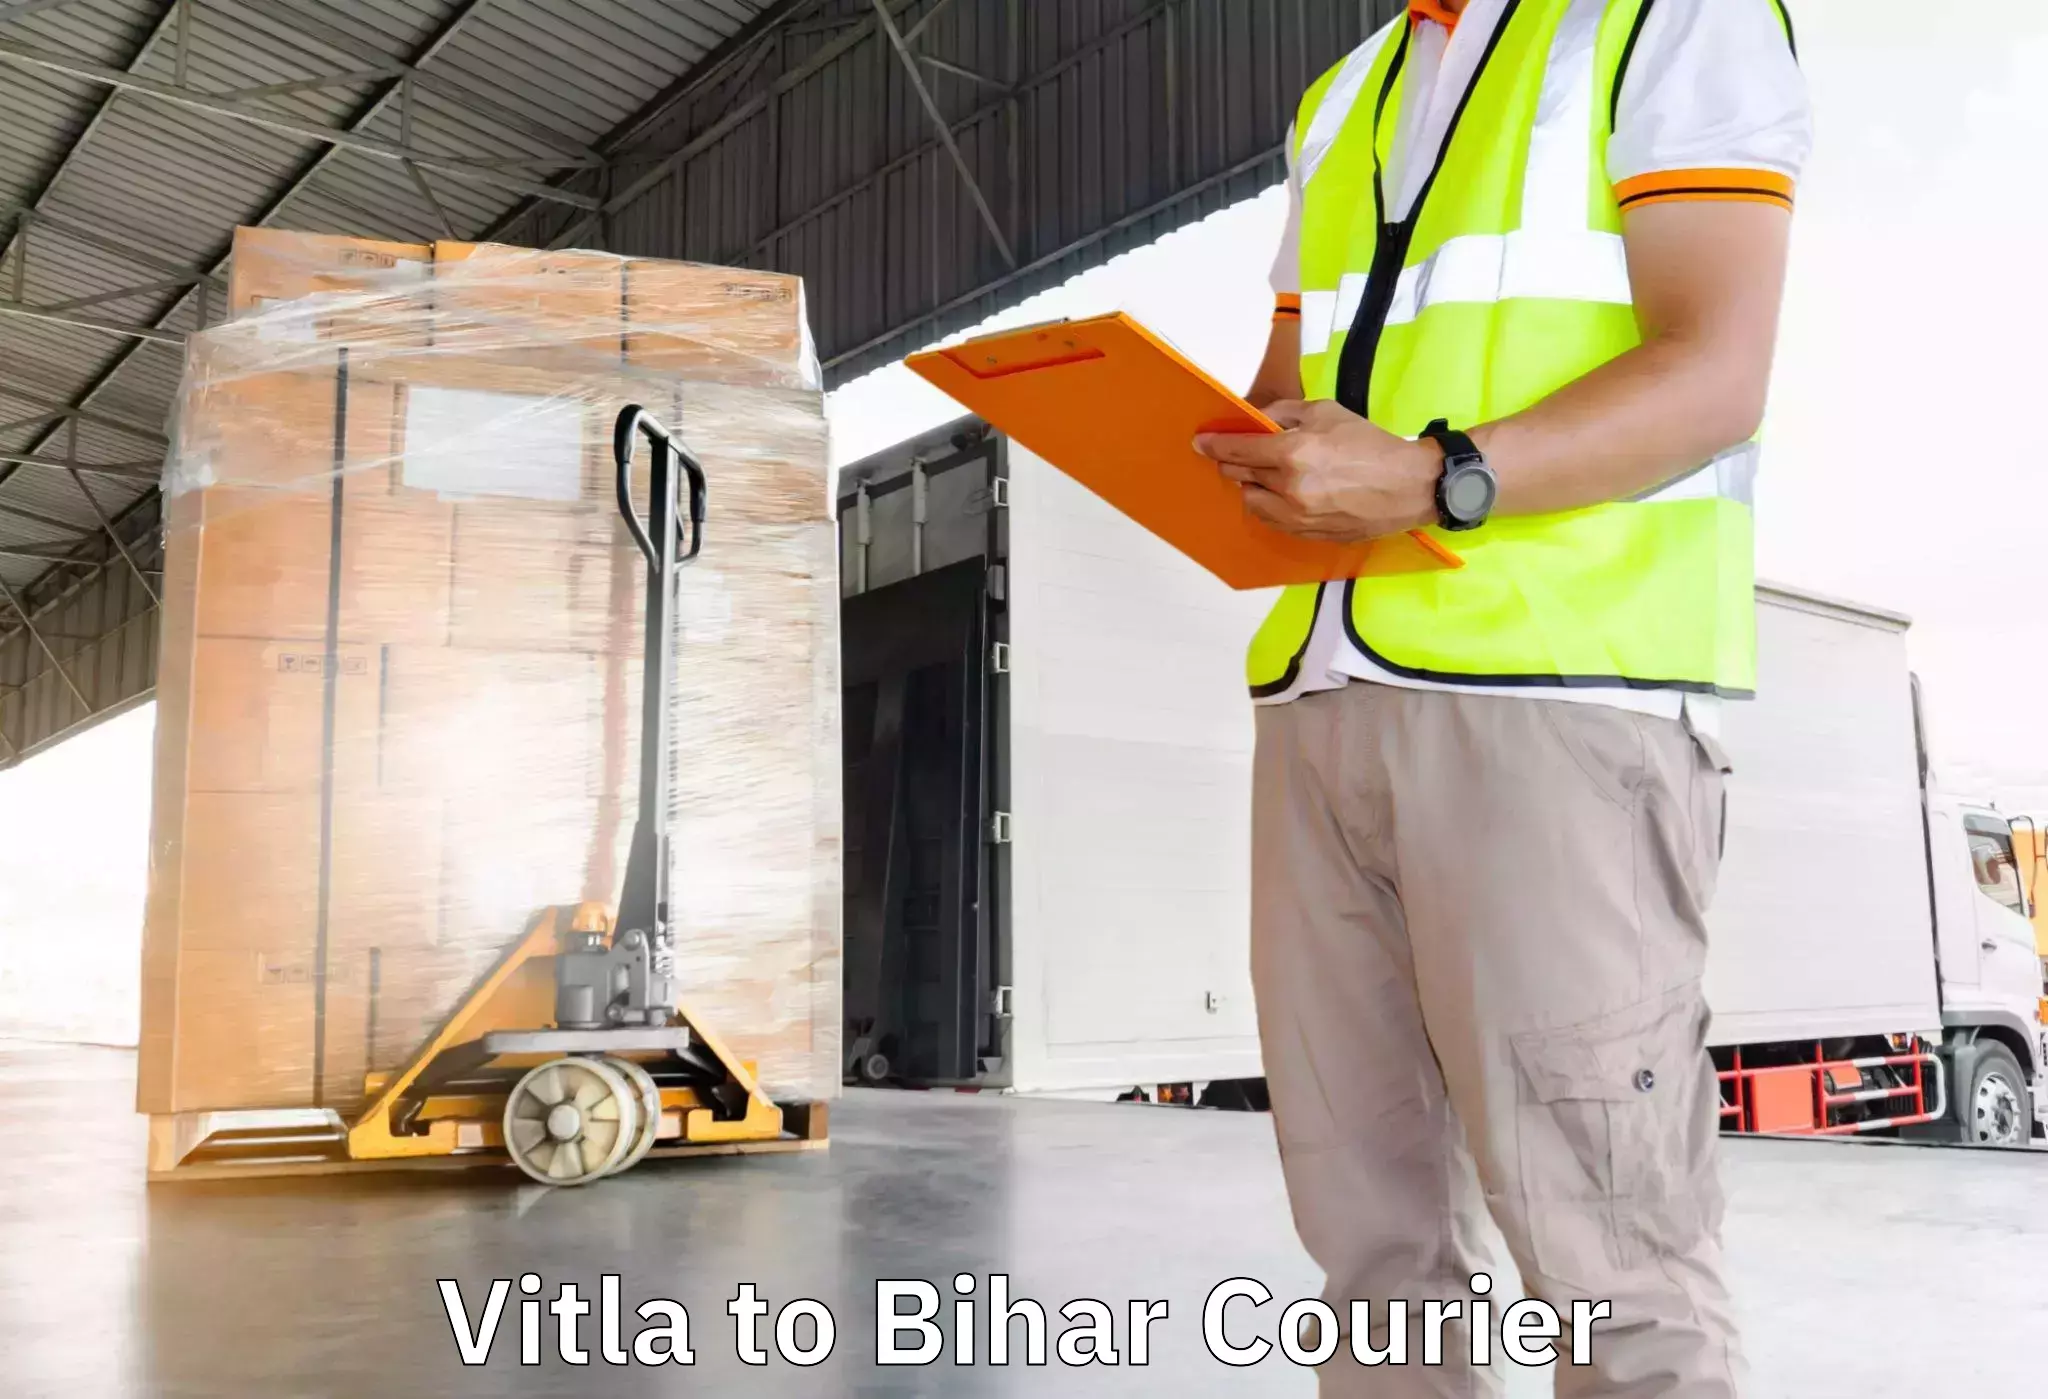 Trusted relocation experts Vitla to Sharfuddinpur